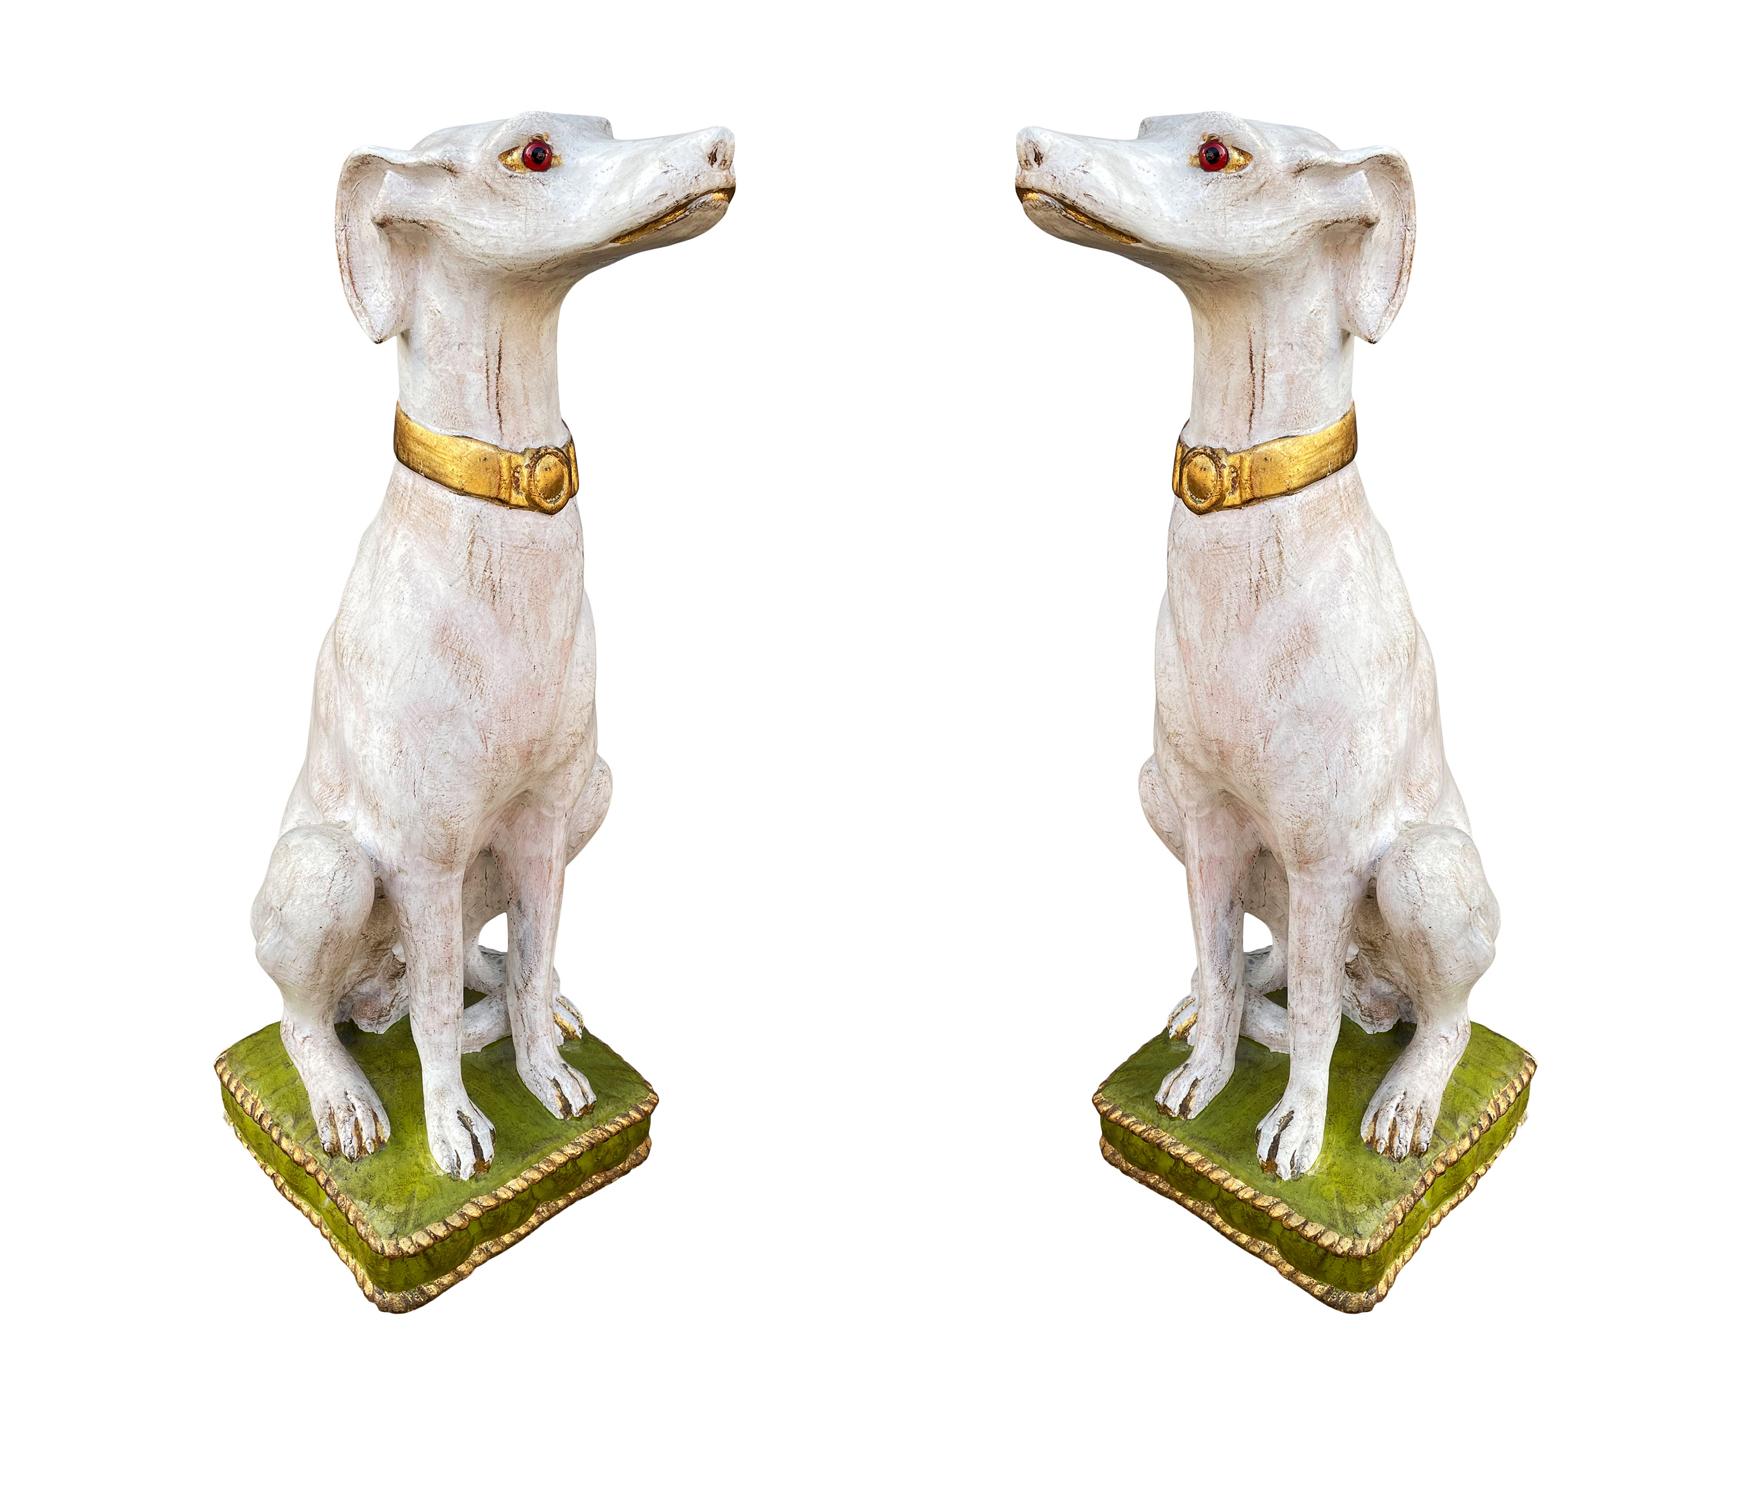 Pair of Hollywood Regency Life Size Seated Italian Greyhound Statues Sculptures 1